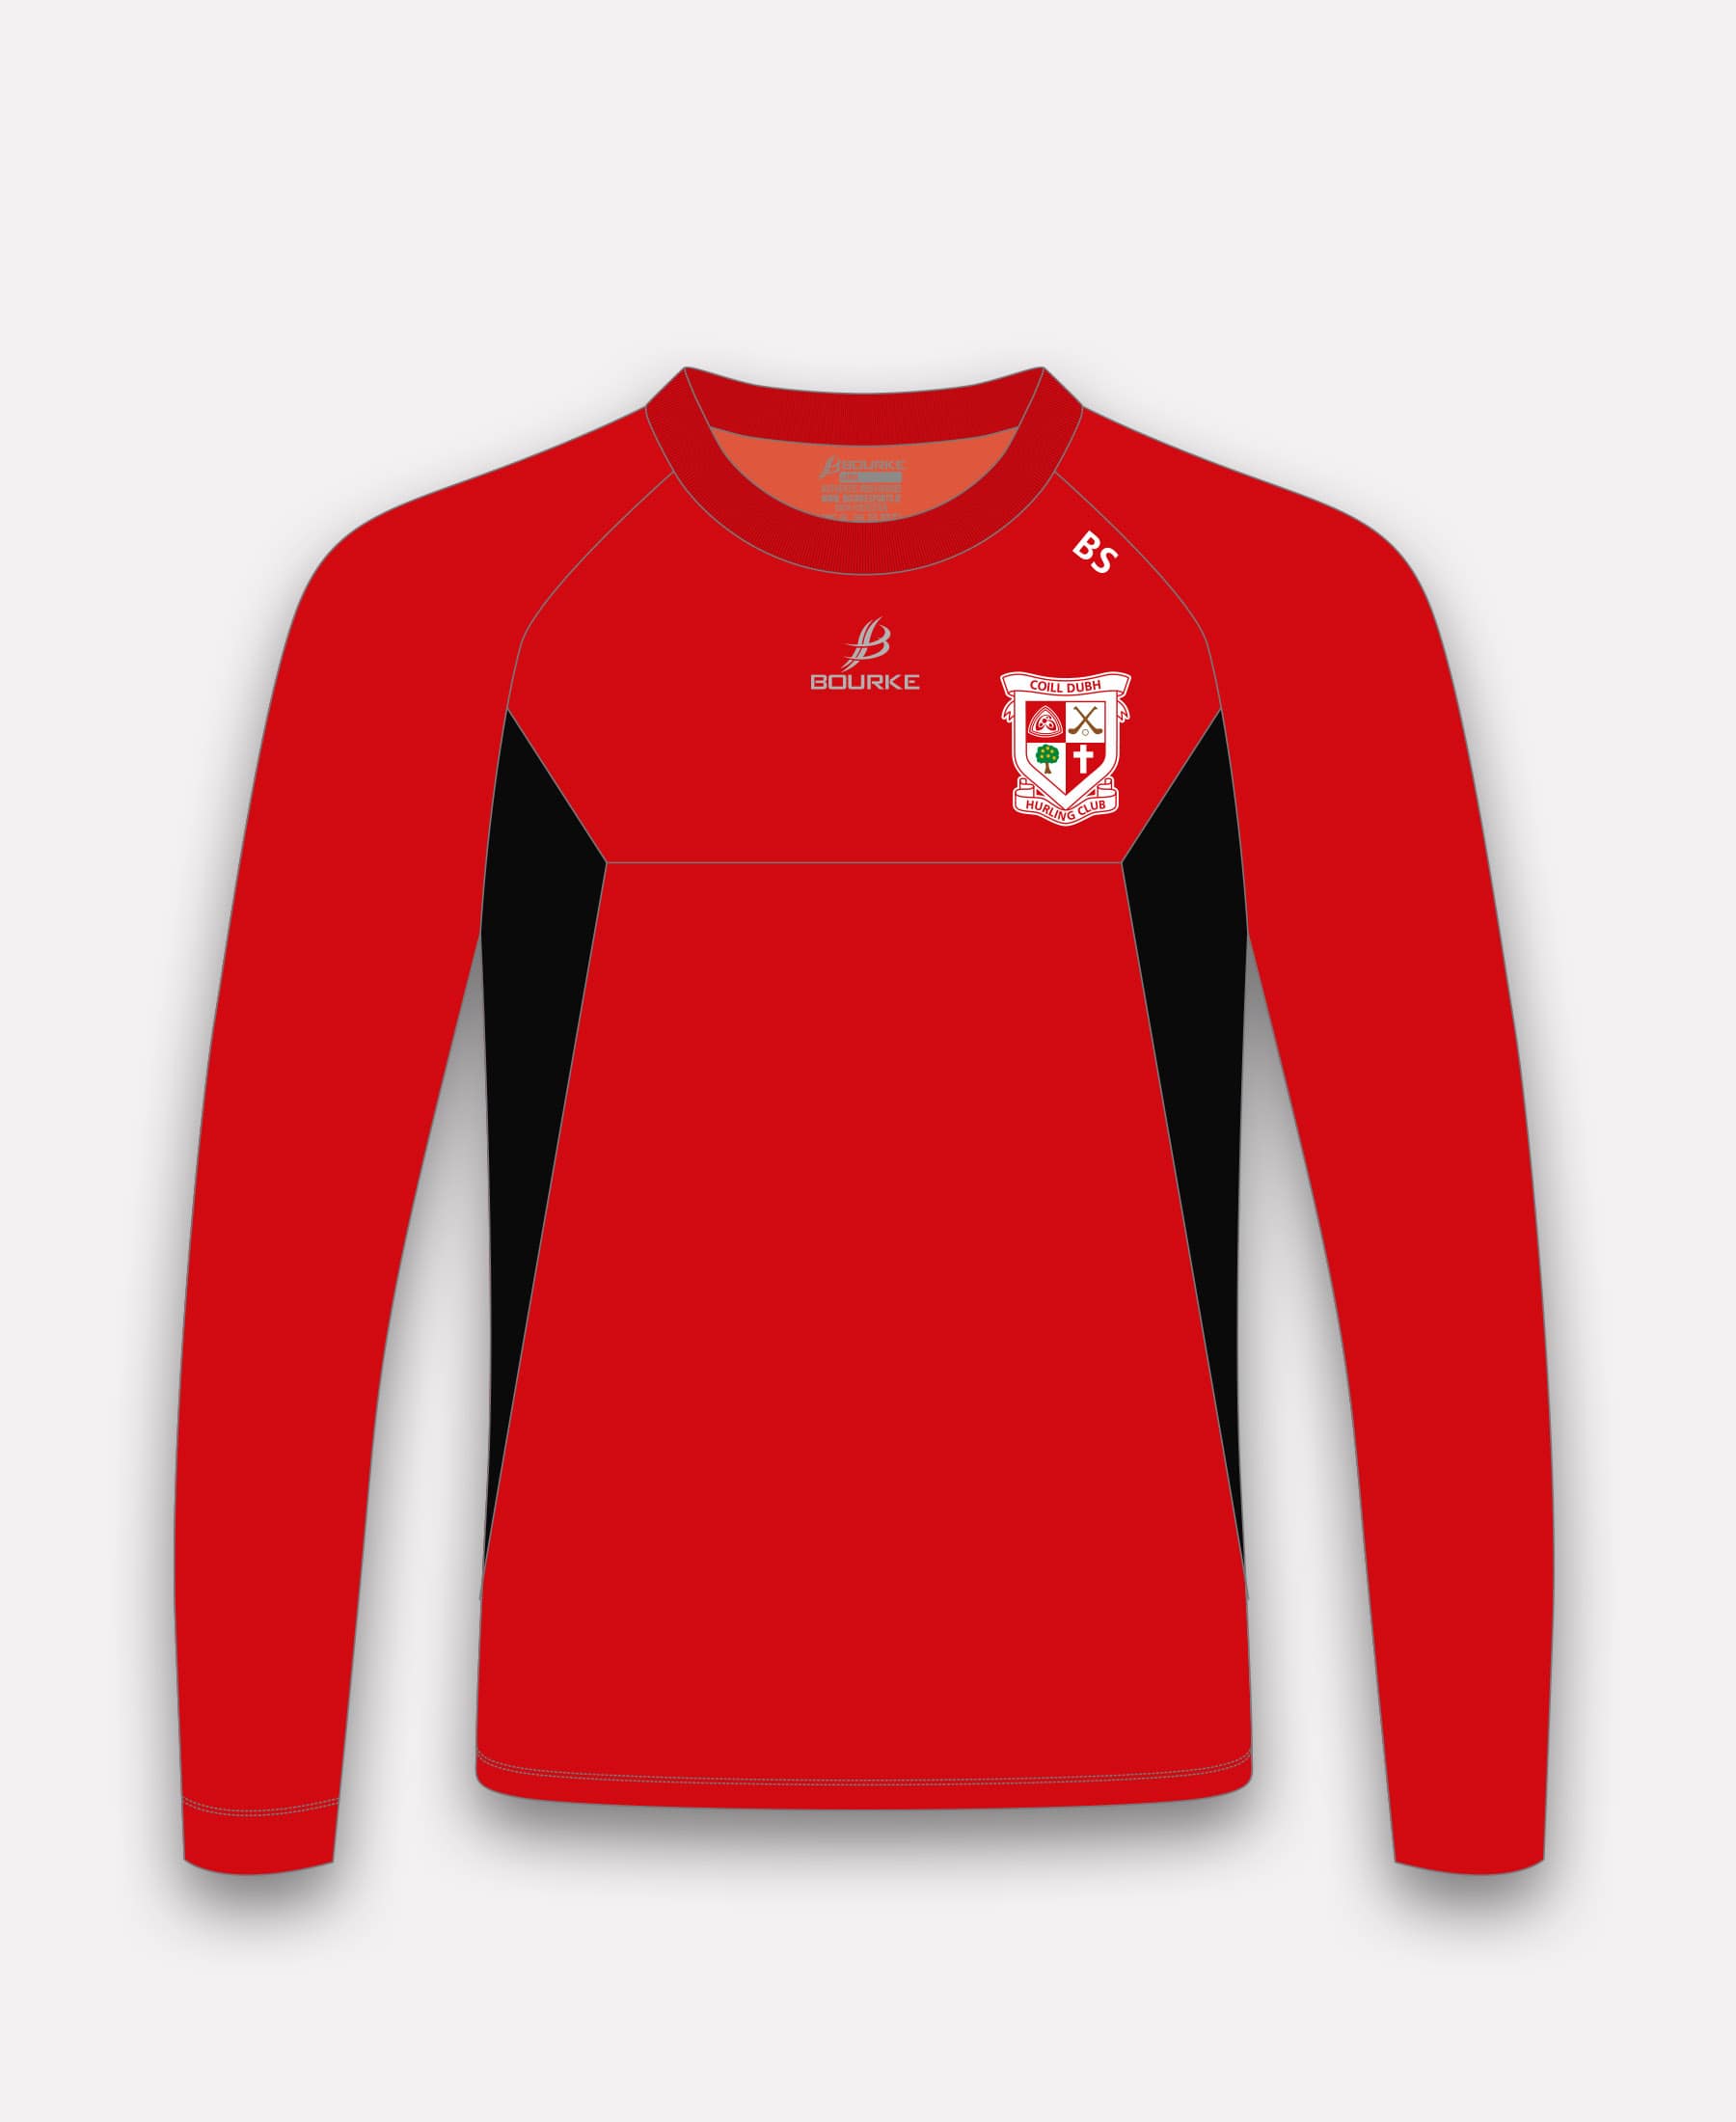 Coill Dubh Hurling Club BARR Crew Neck (Red/Black)